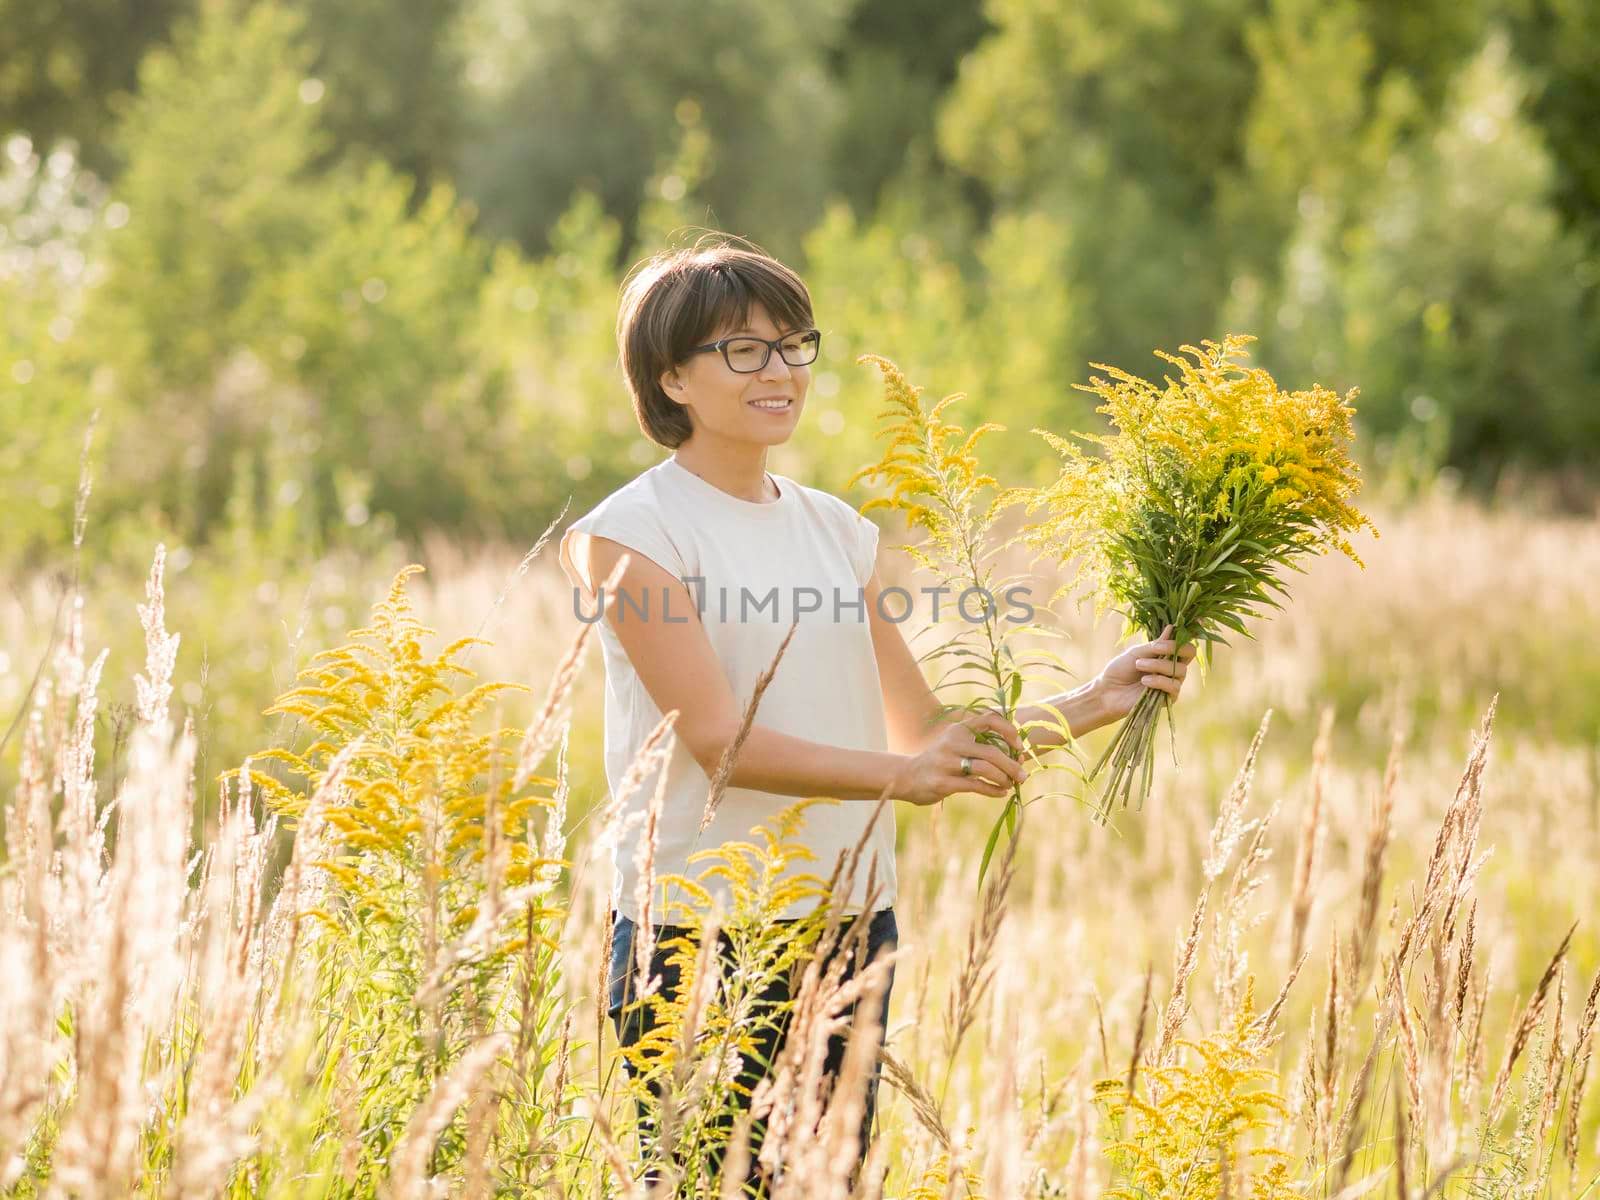 Woman is picking Solidago, commonly called goldenrods, on autumn field. Florist at work. Using yellow flowers as decorative bouquet for home interior. by aksenovko